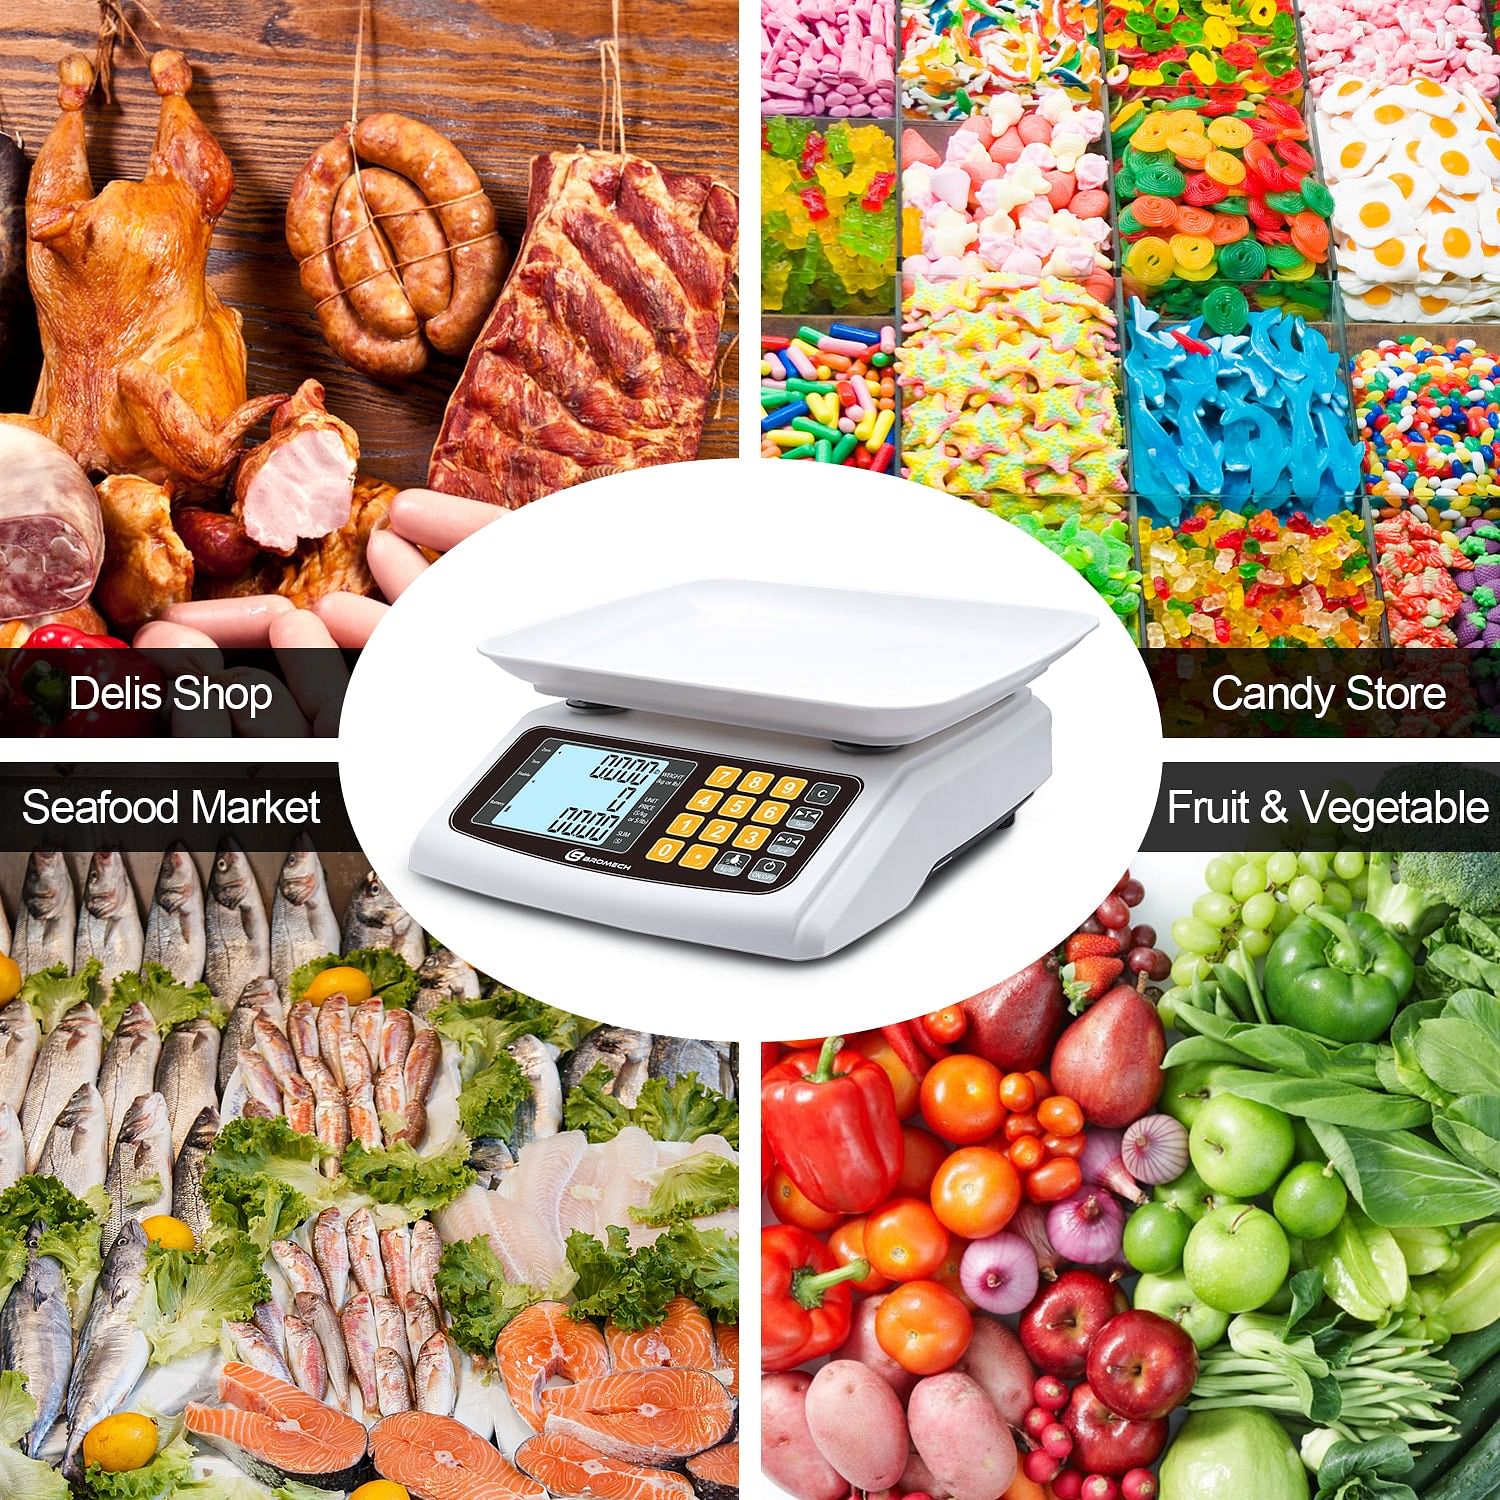  Price Computing Scale 66LB Electronic Meat Scale Commercial  Digital Food Weight Scale for Deli Supermarket Farmers Market Retail Outlet  Store: Home & Kitchen